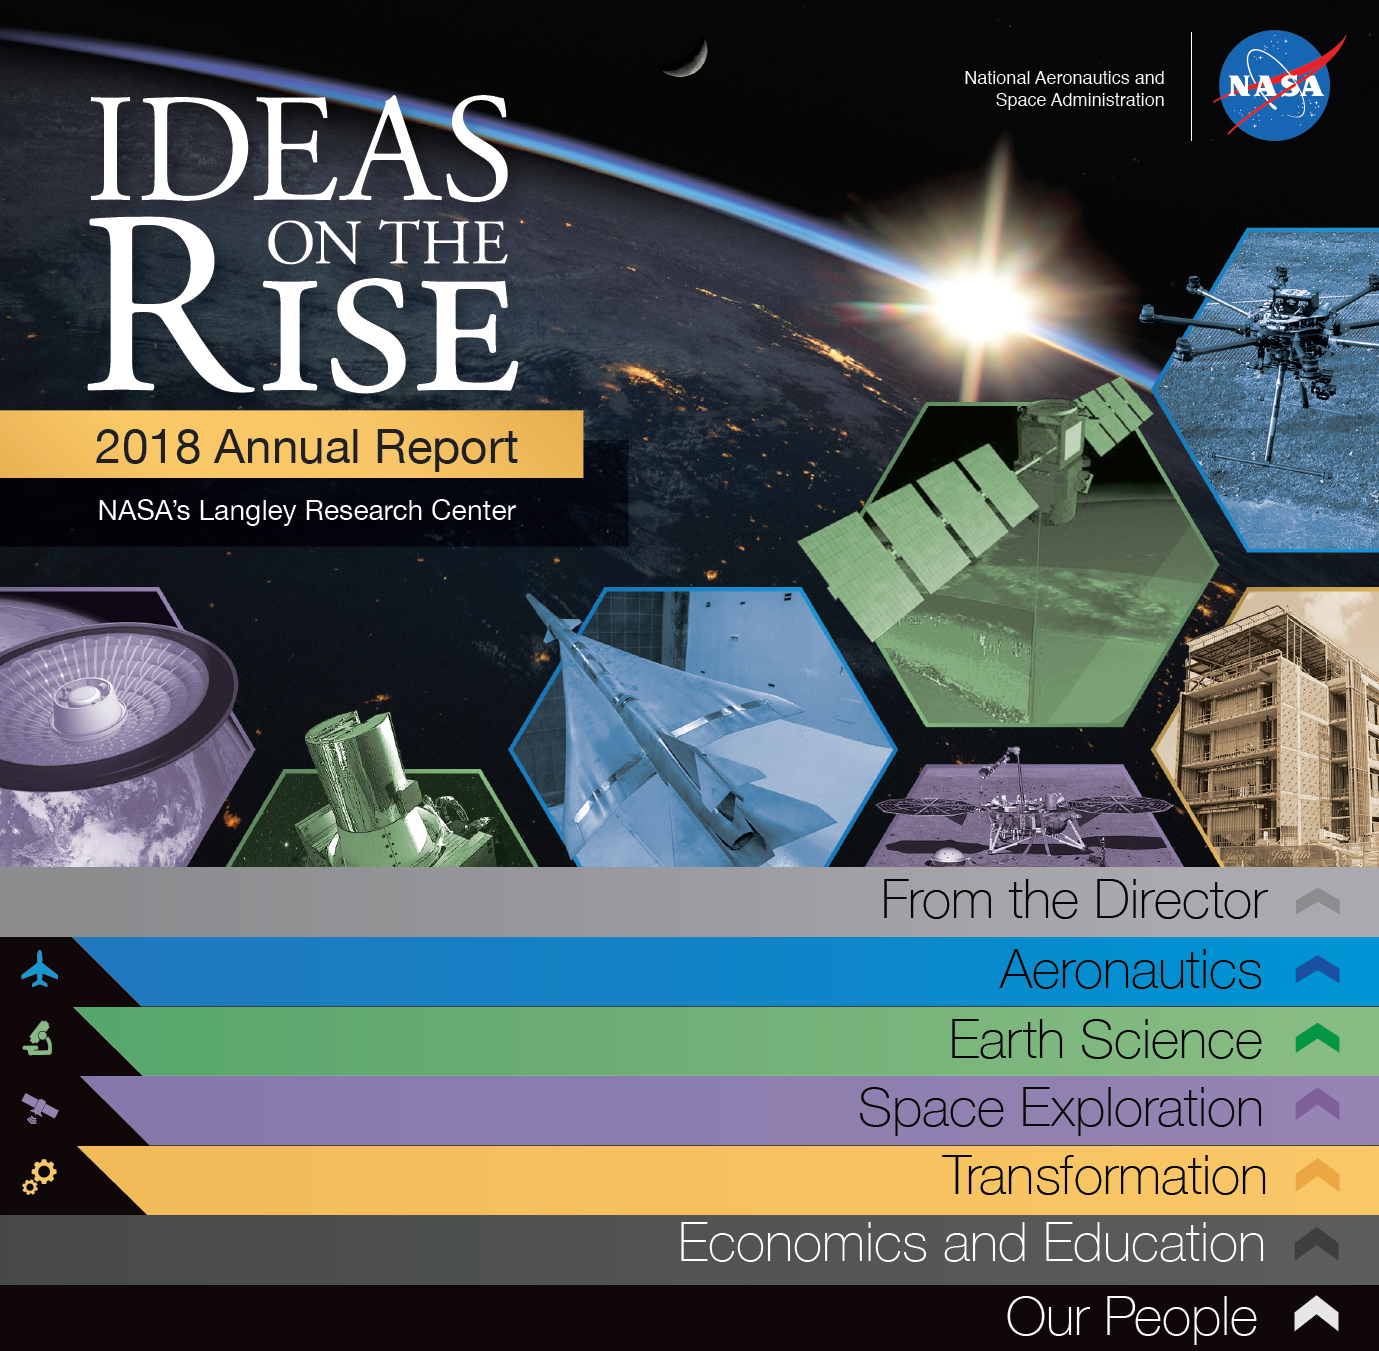 The cover of NASA Langley's 2018 Annual Report.